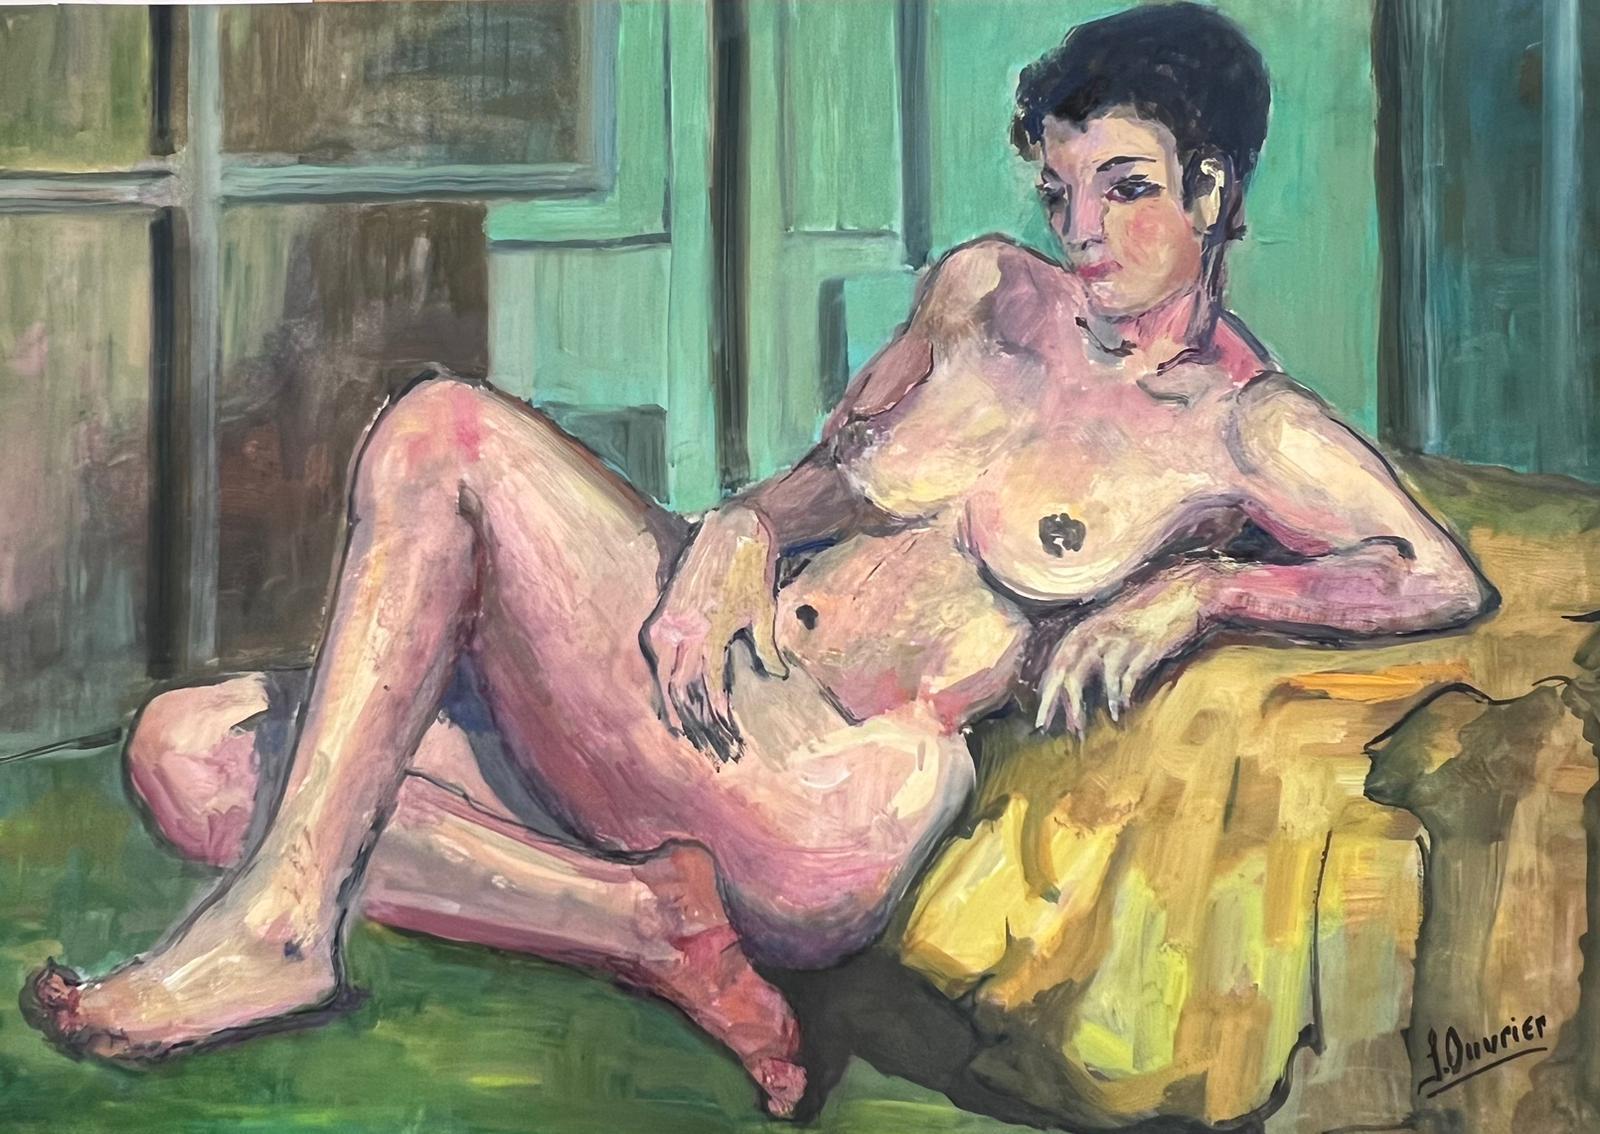 The Artists Model
Nude Lady Model
French School, circa 1970's  
signed oil painting on card, unframed
size: 17 x 24 inches
condition: overall very good, a very few light markings to the surface but nothing detrimental to the appeal and appearance of